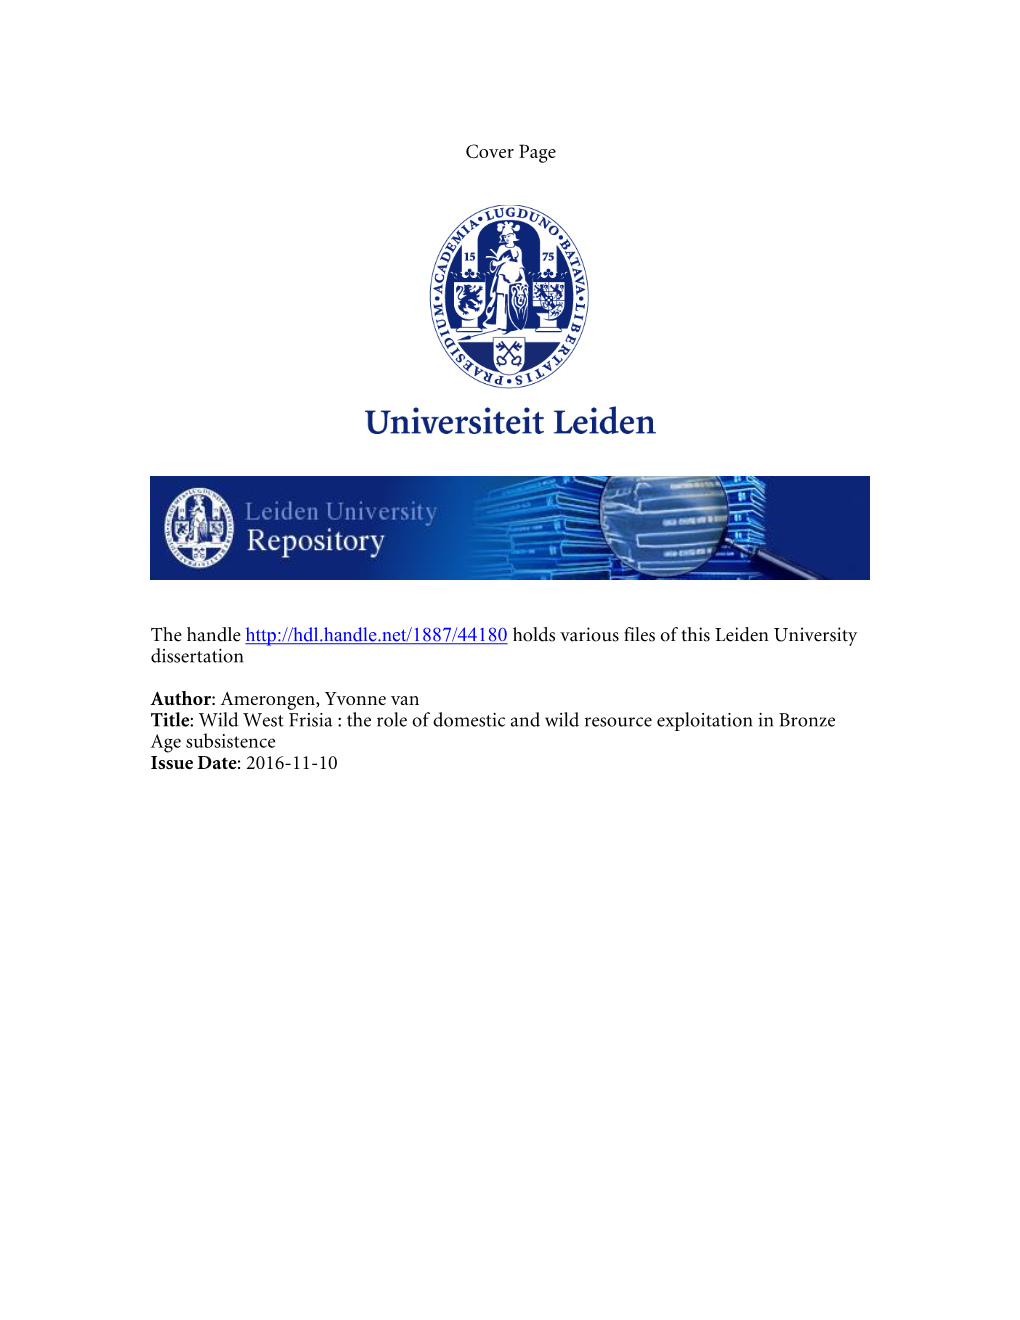 Cover Page the Handle Holds Various Files of This Leiden University Dissertation Author: Ameron